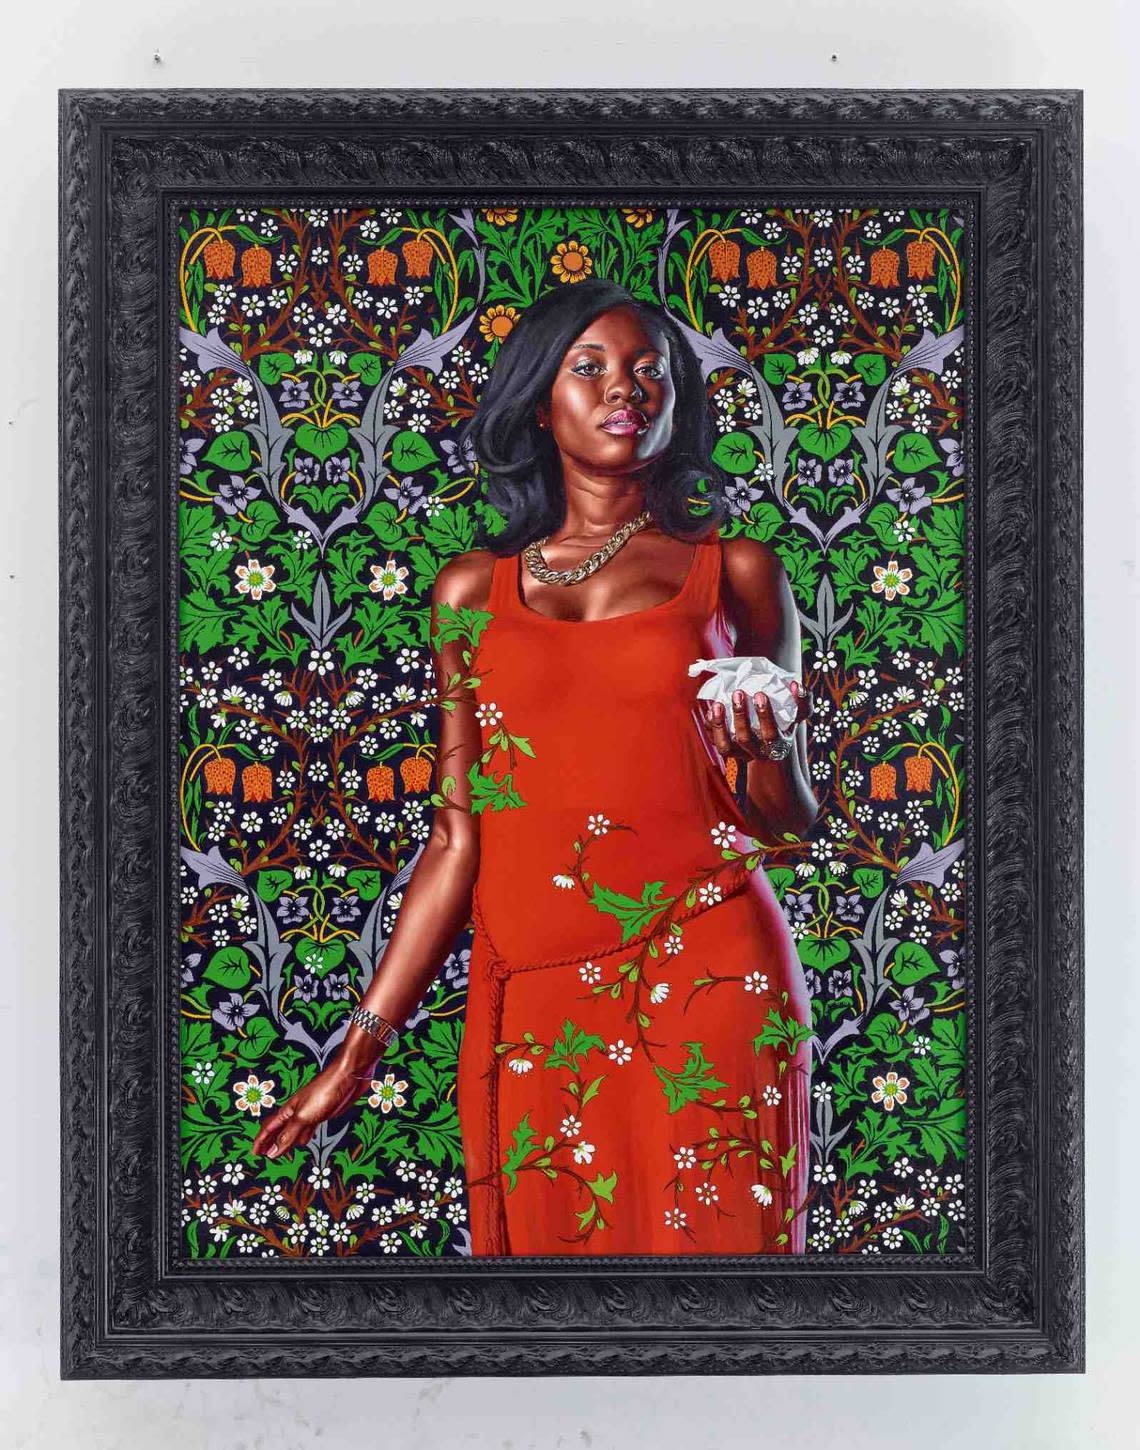 “Sir Richard Owen, 1804-1892,” 2013 painting by Kehinde Wiley, from the show “Lux et Veritas” at the NSU Museum of Art.